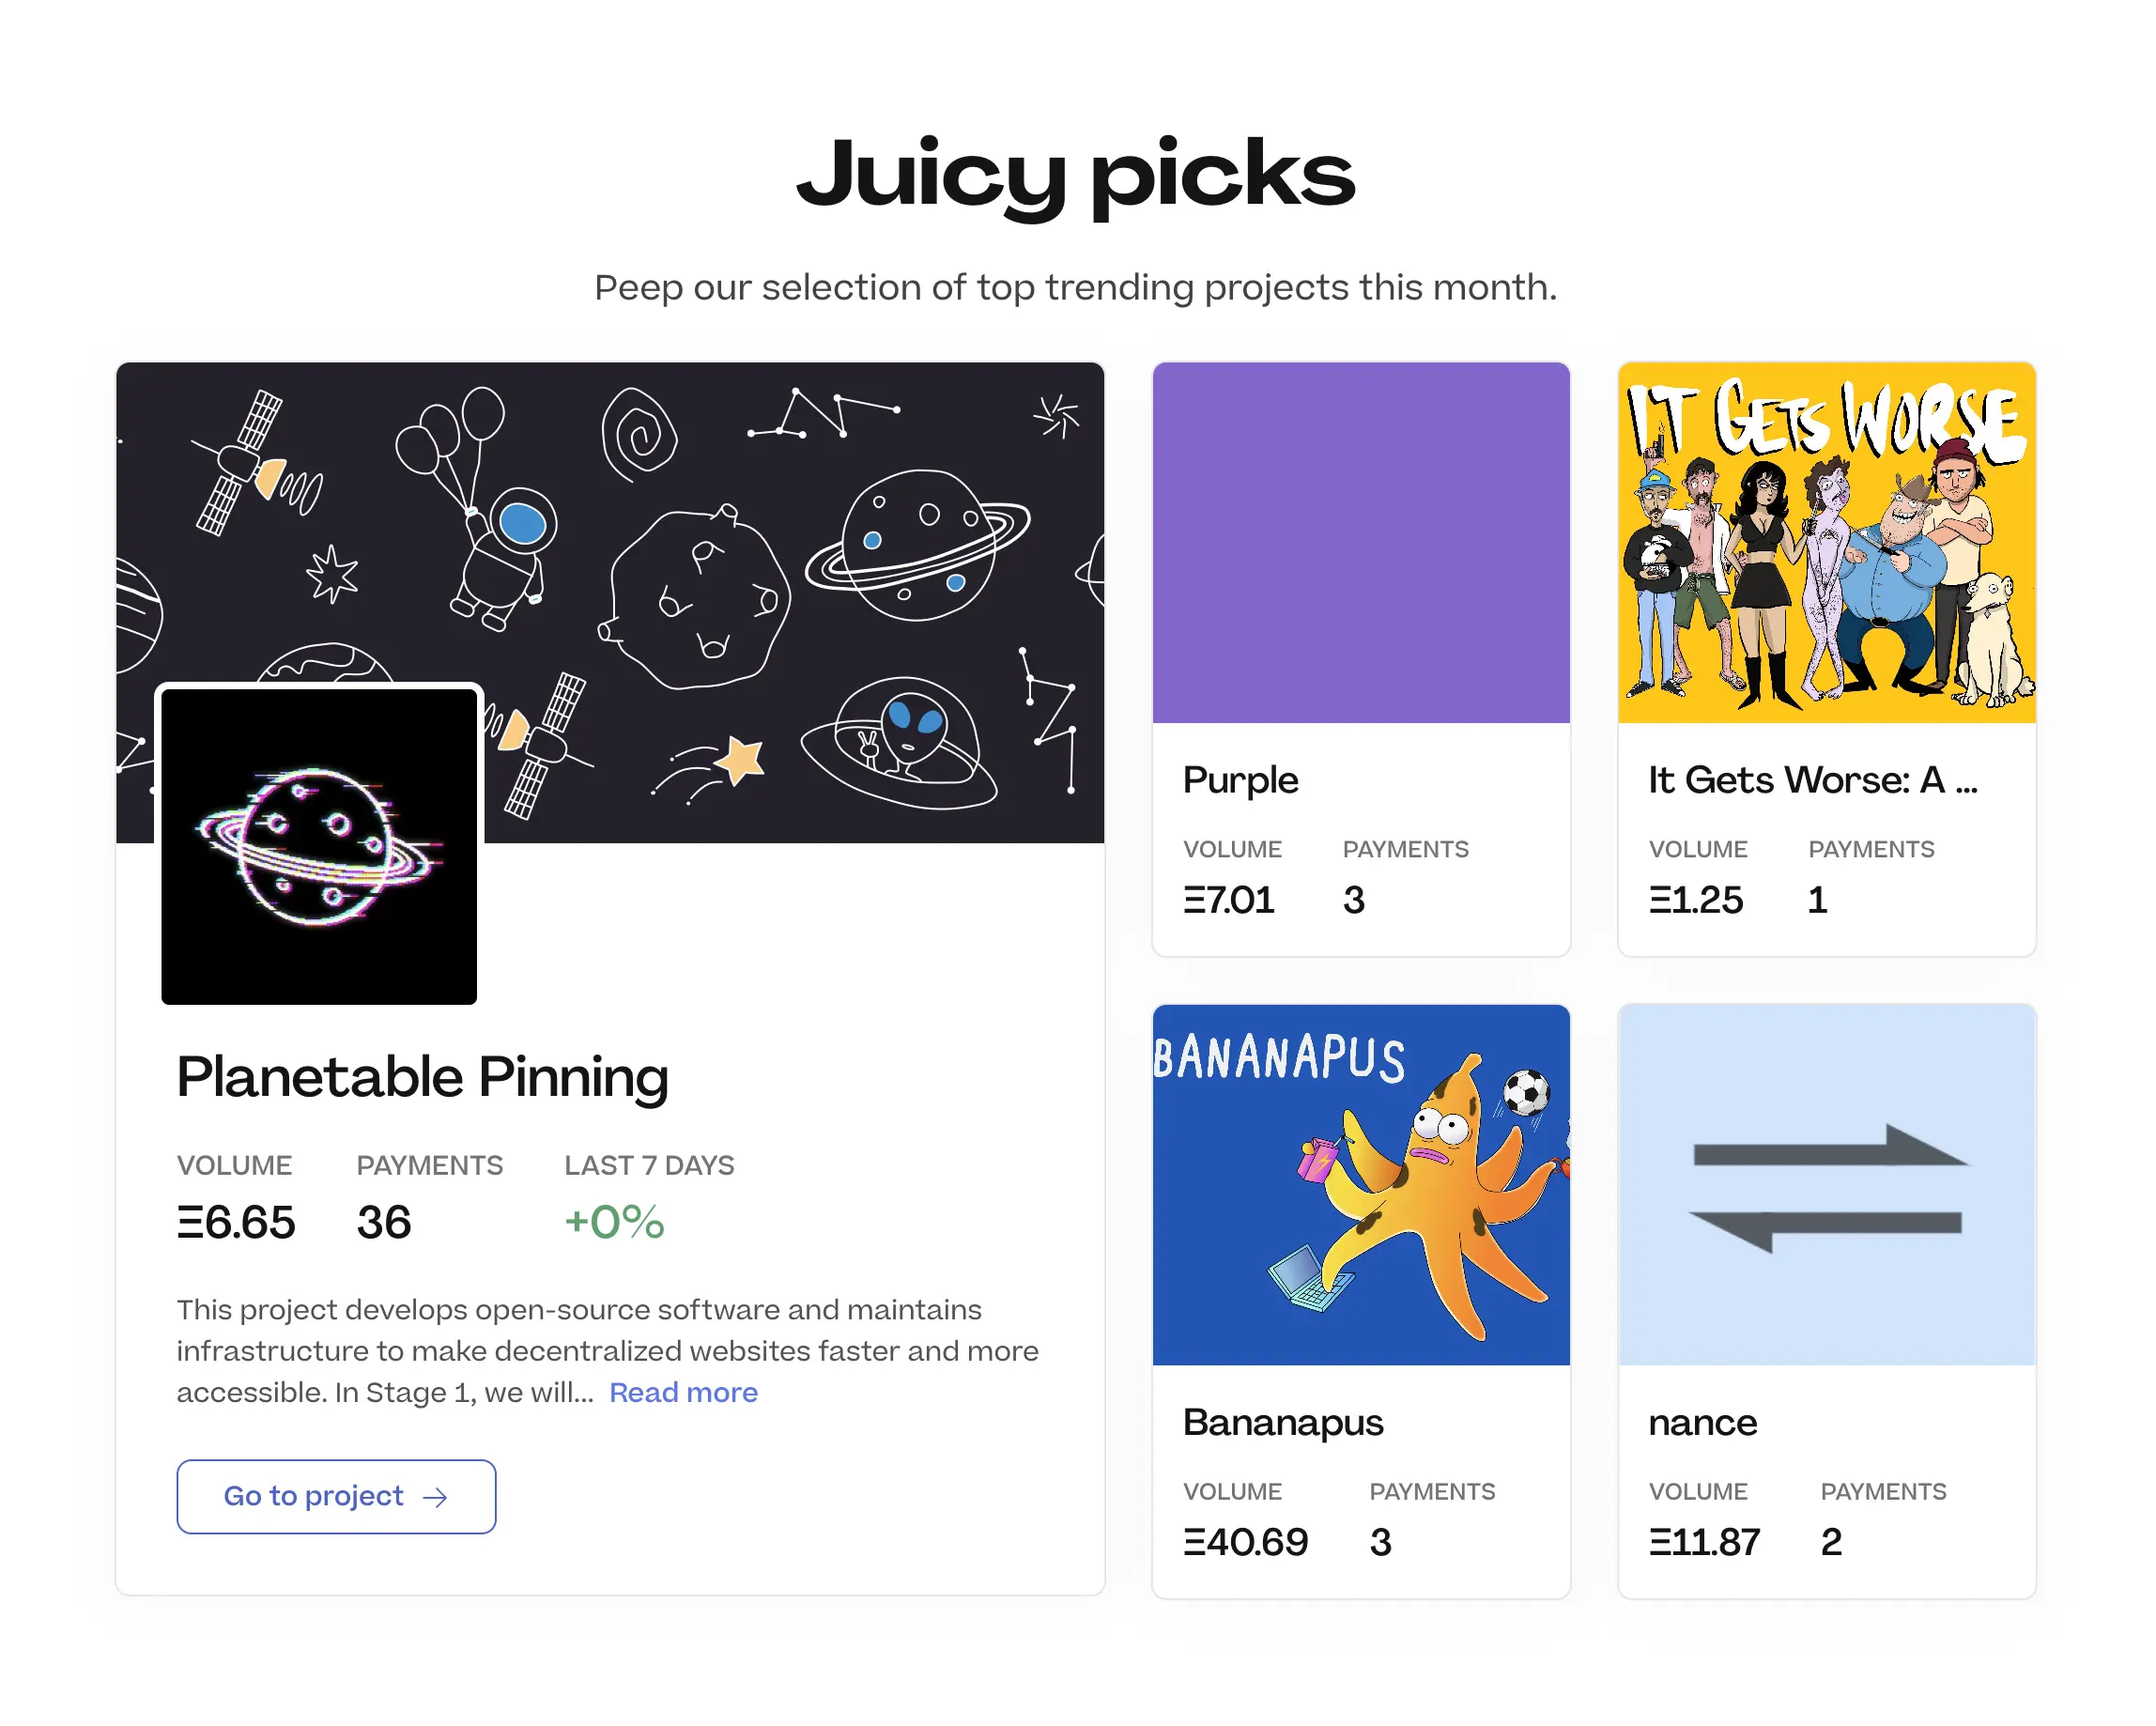 New Juicy Picks section